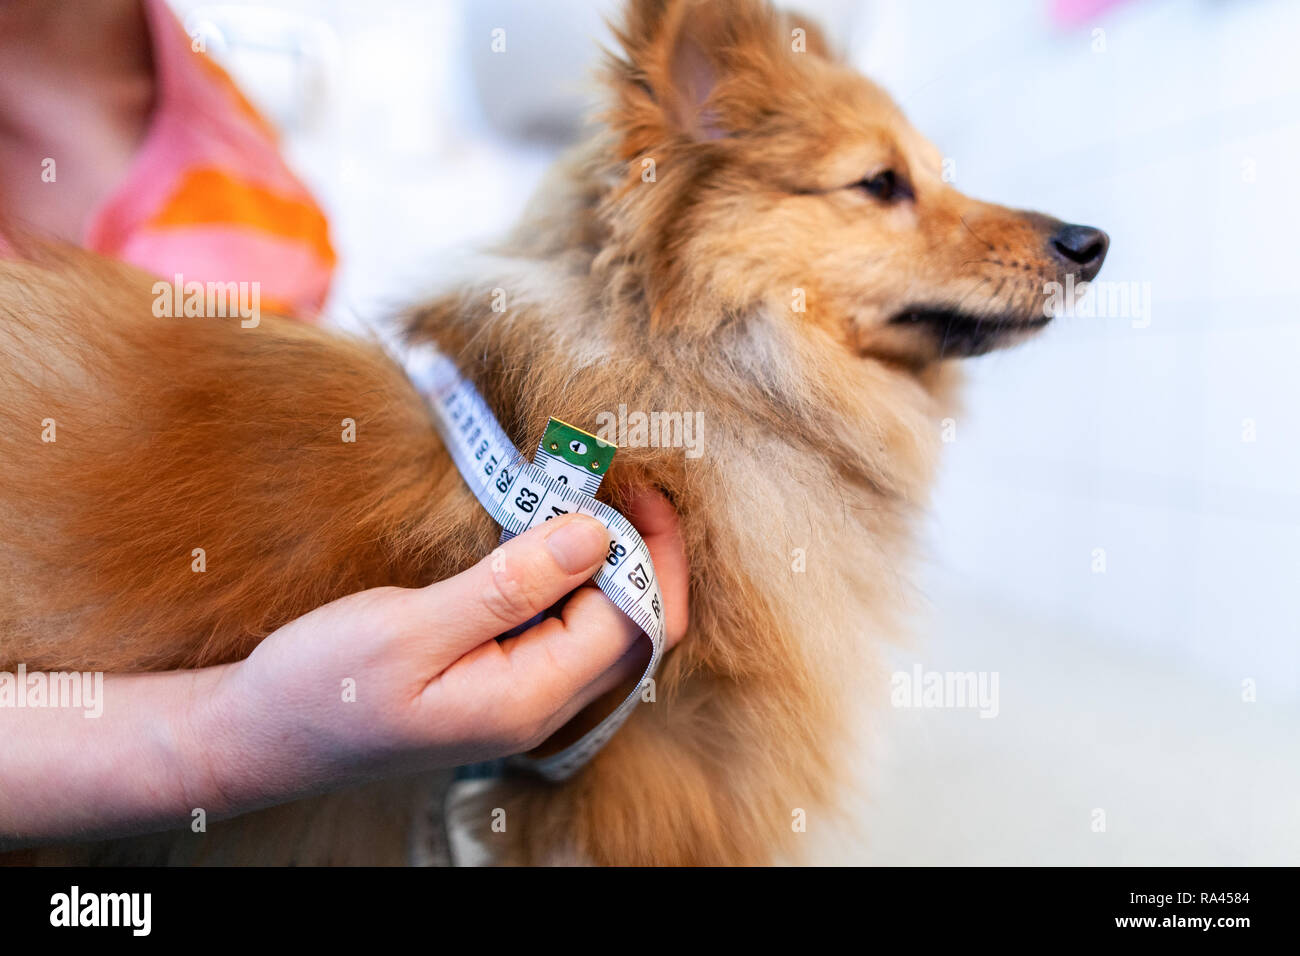 Belly circumference is measured with a tape measure on a dog Stock Photo